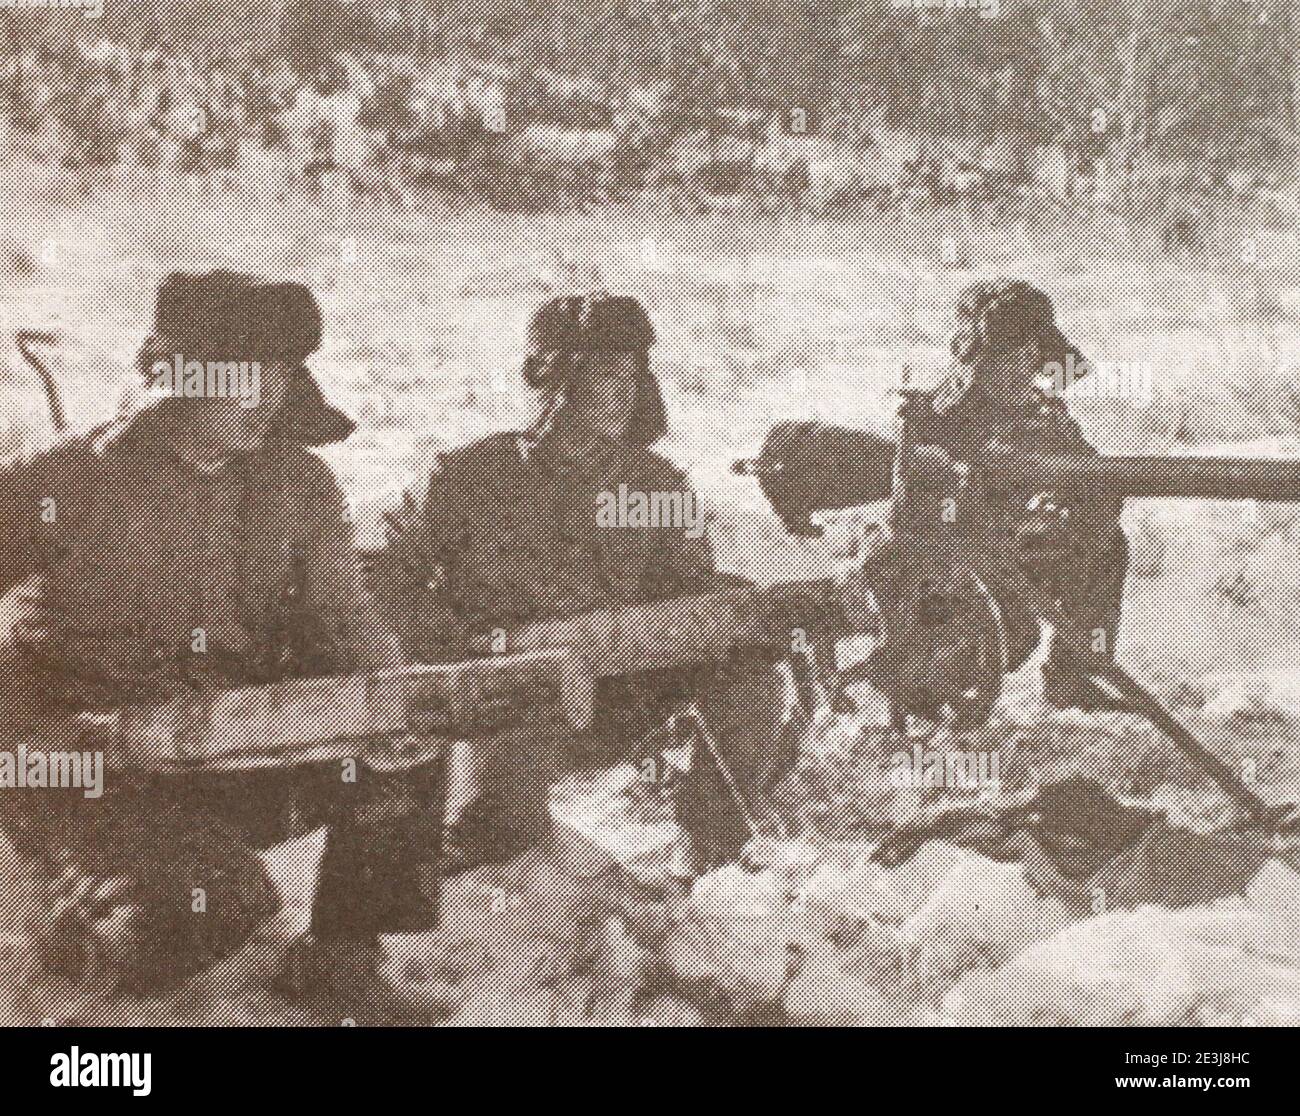 Soldiers of the  People's Liberation Army of China in the area of Damansky Island during the Sino-Soviet border conflict. The Sino-Soviet border conflict was a seven-month undeclared military conflict between the Soviet Union and China in 1969, following the Sino-Soviet split. The most serious of these border clashes, which brought the world's two largest communist states to the brink of war, occurred in March 1969 in the vicinity of Zhenbao (Damansky) Island on the Ussuri (Wusuli) River, near Manchuria. The conflict resulted in a ceasefire, with a return to the status quo. Stock Photo